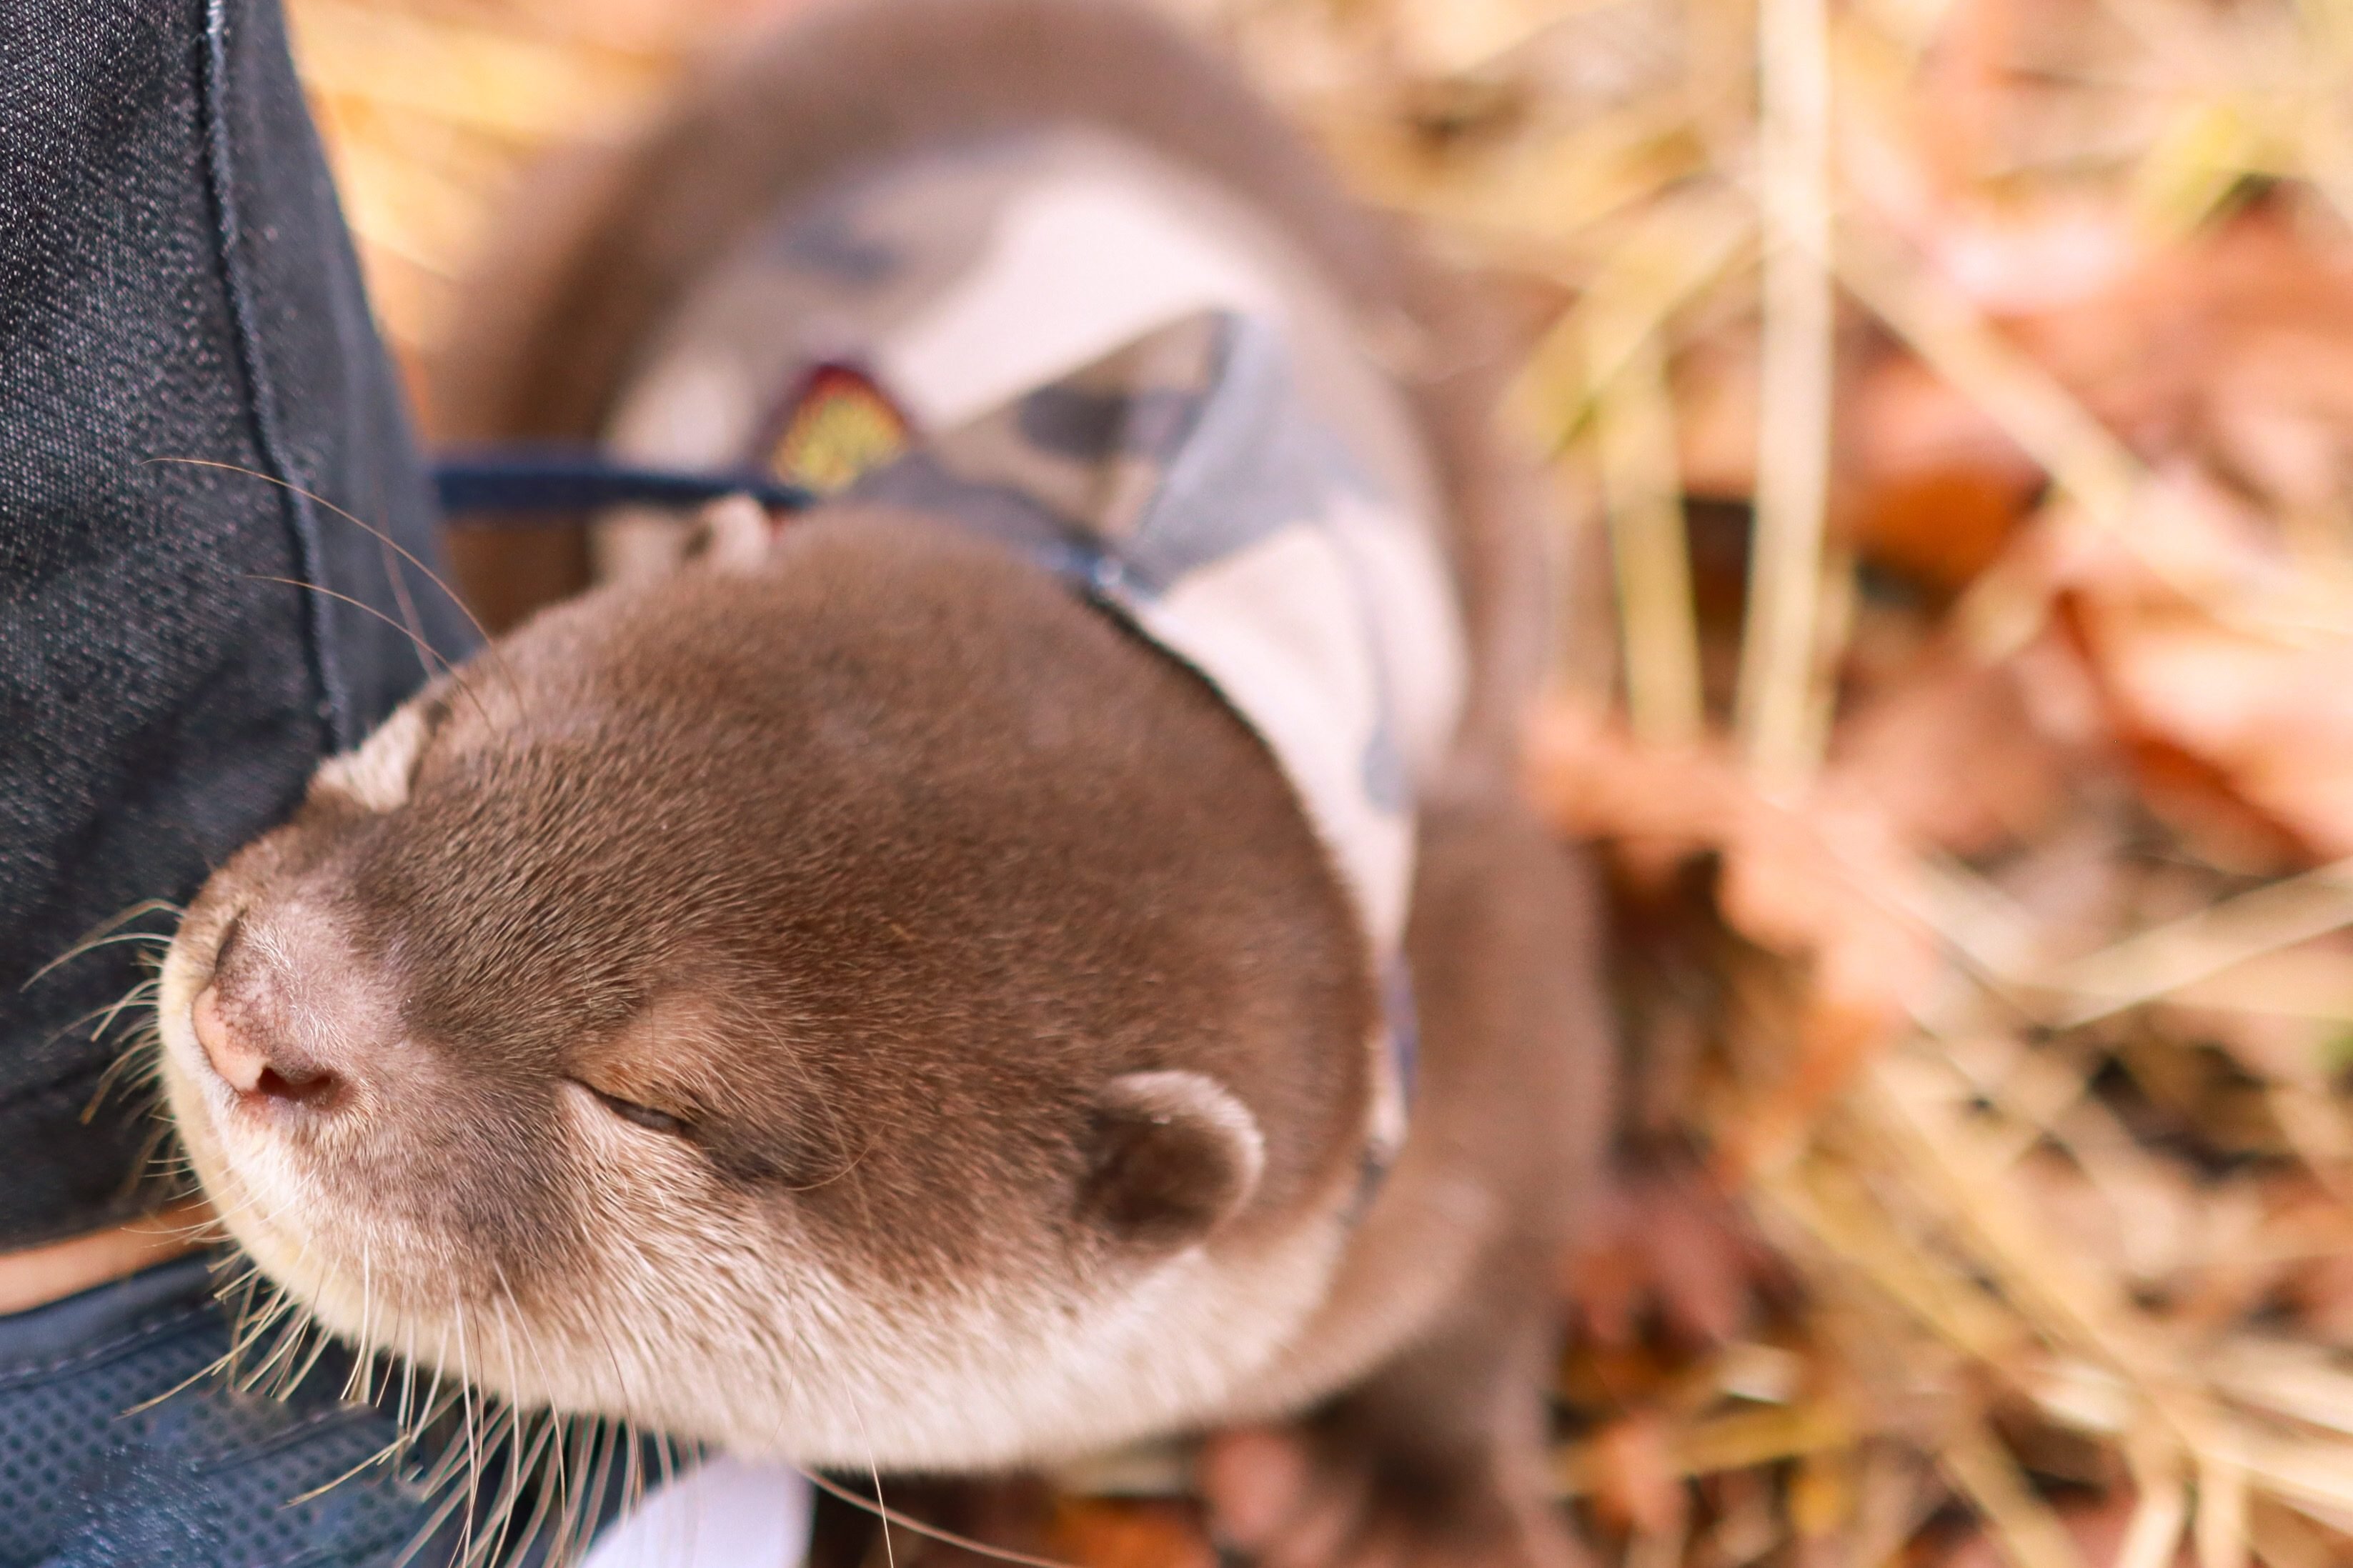 Adorable Photos of Baby Otters That'll Make Your Day Better Reader's